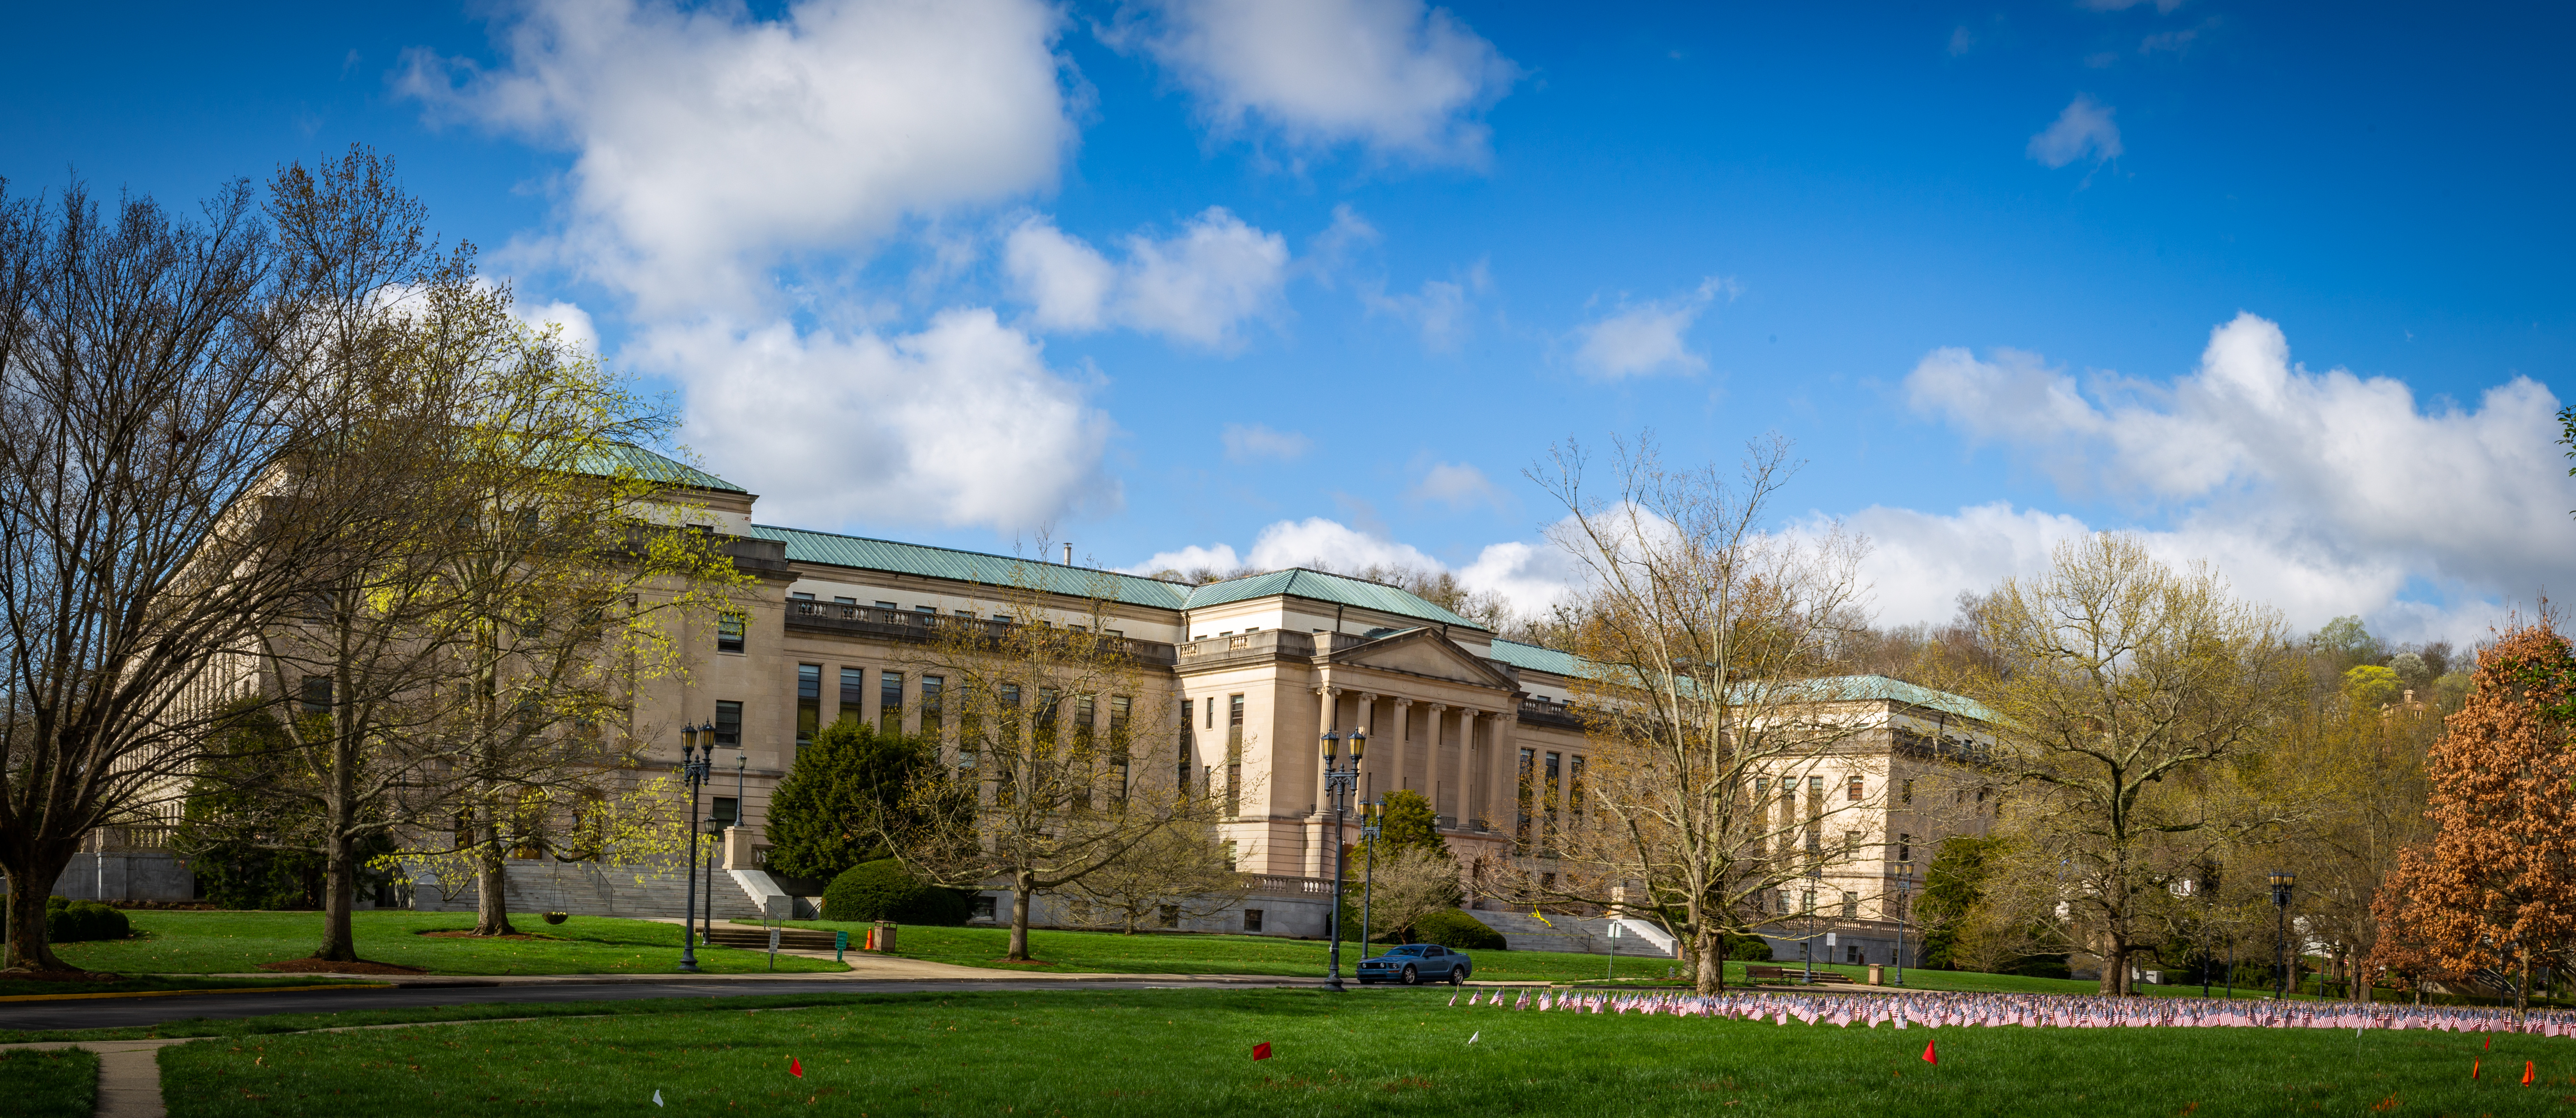 a photograph of the Kentucky State Capitol Annex Building in the capital city of Frankfort during early spring